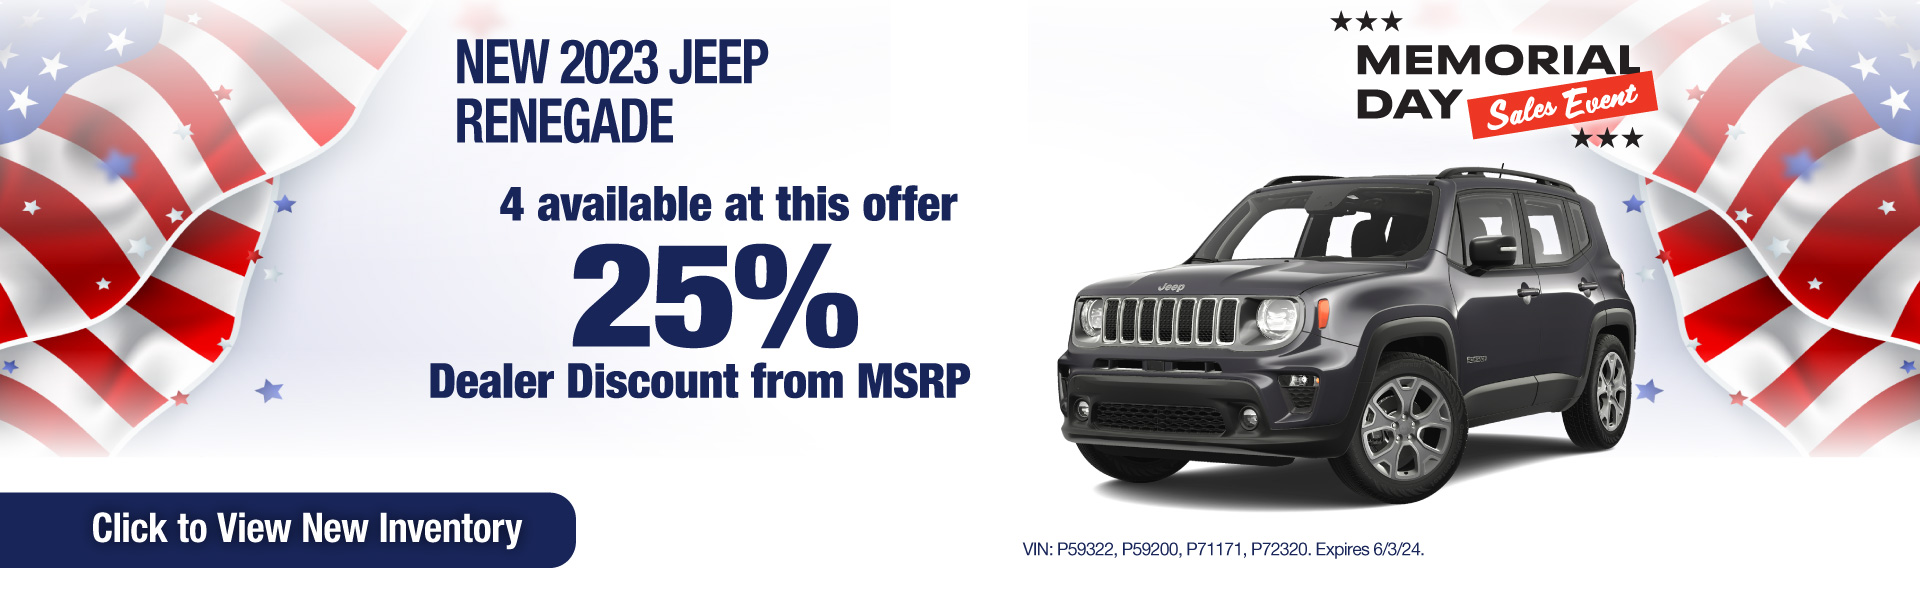 Purchase a New 2023 Jeep Renegade and get a 25% Dealer Discount from MSRP! Offer expires 6/3/24.